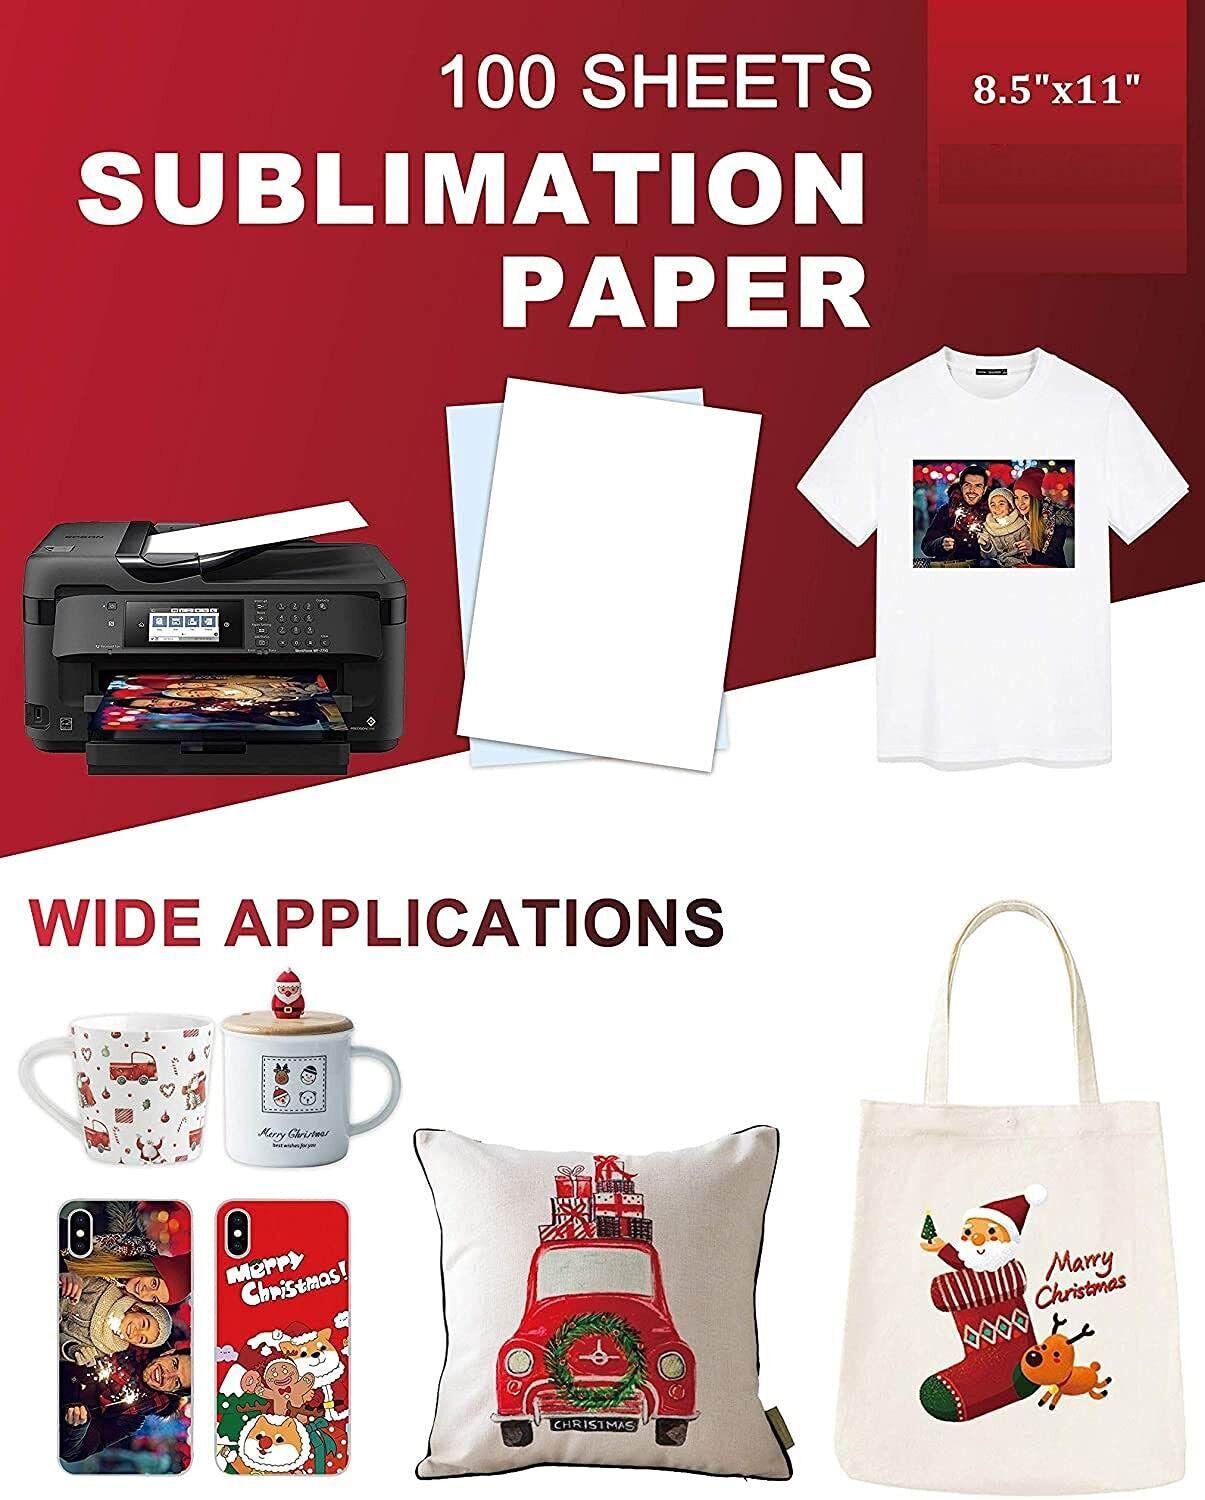 A4 Sublimation Paper - 100 Sheets for All Inkjet Printer with Sublimation Ink